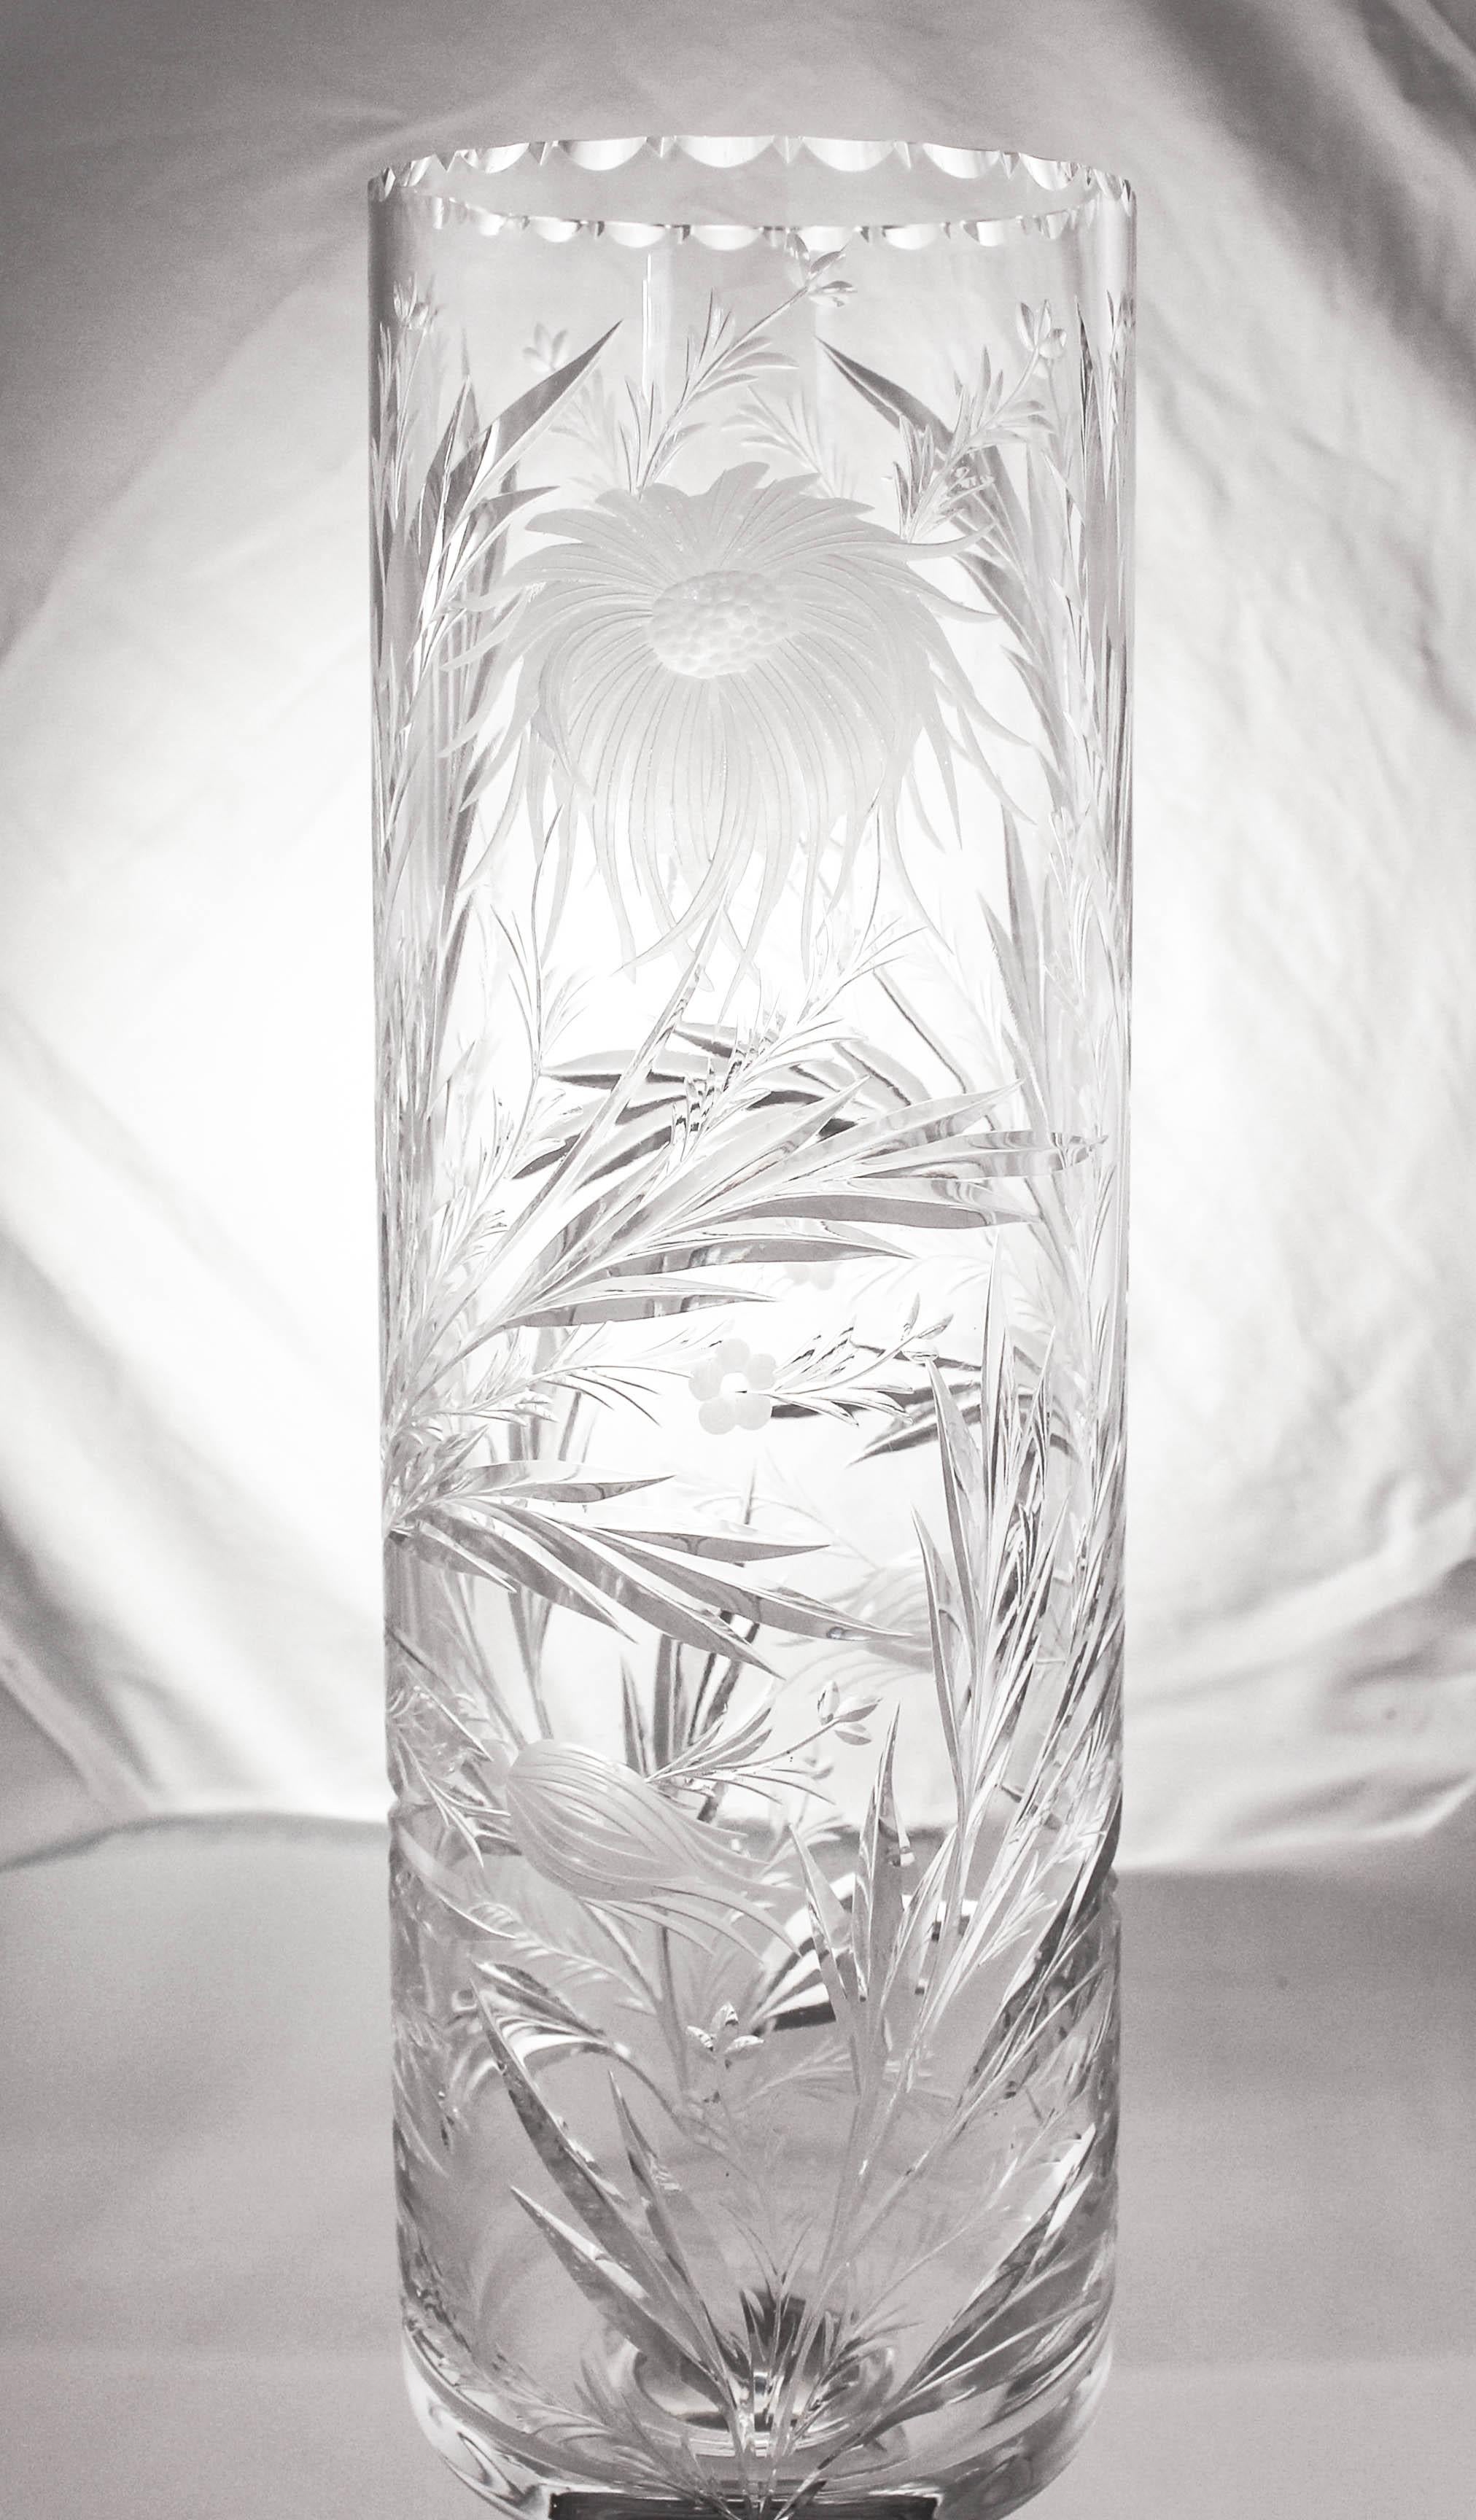 We proudly offer this stunning sterling and crystal vase by nine other than the world famous Hawkes Glass Company. Hawkes was the premiere crystal manufacturer at the turn of the 19th century. This vase has acid-etched and cut-glass flowers and